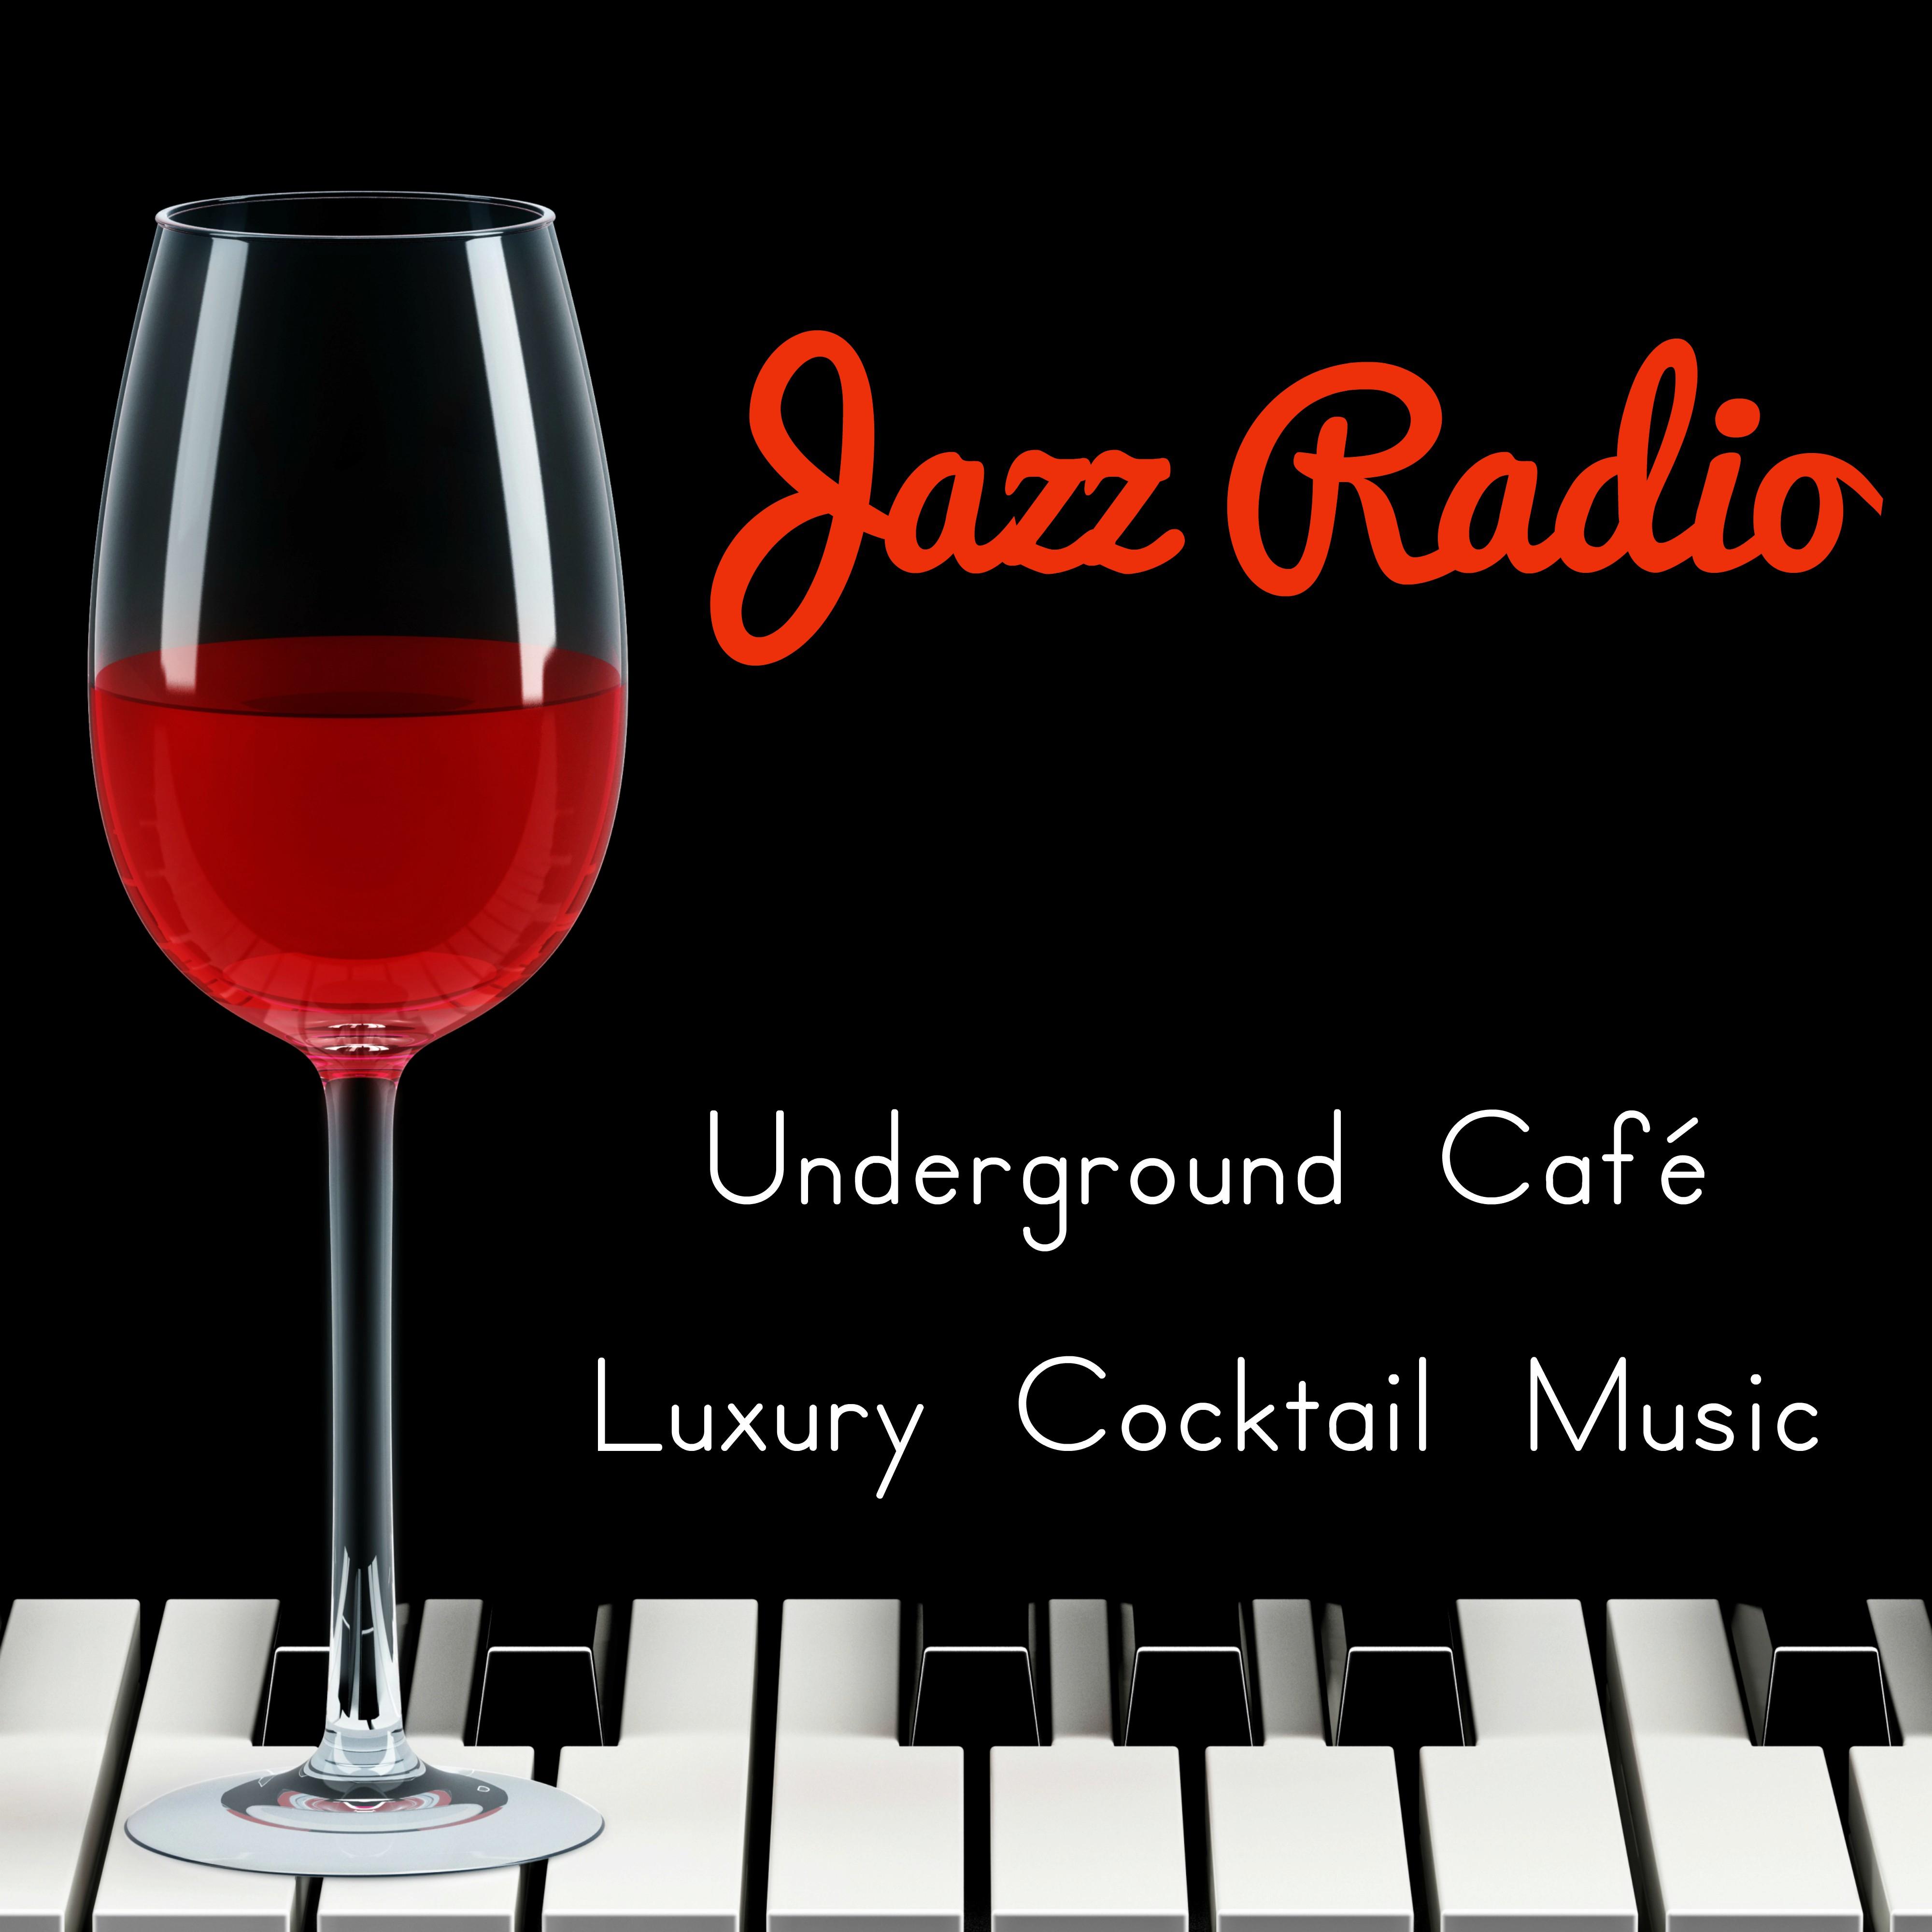 Jazz Radio  Underground Cafe Luxury Cocktail Music to Relax with Jazz Lounge Chillout Sounds